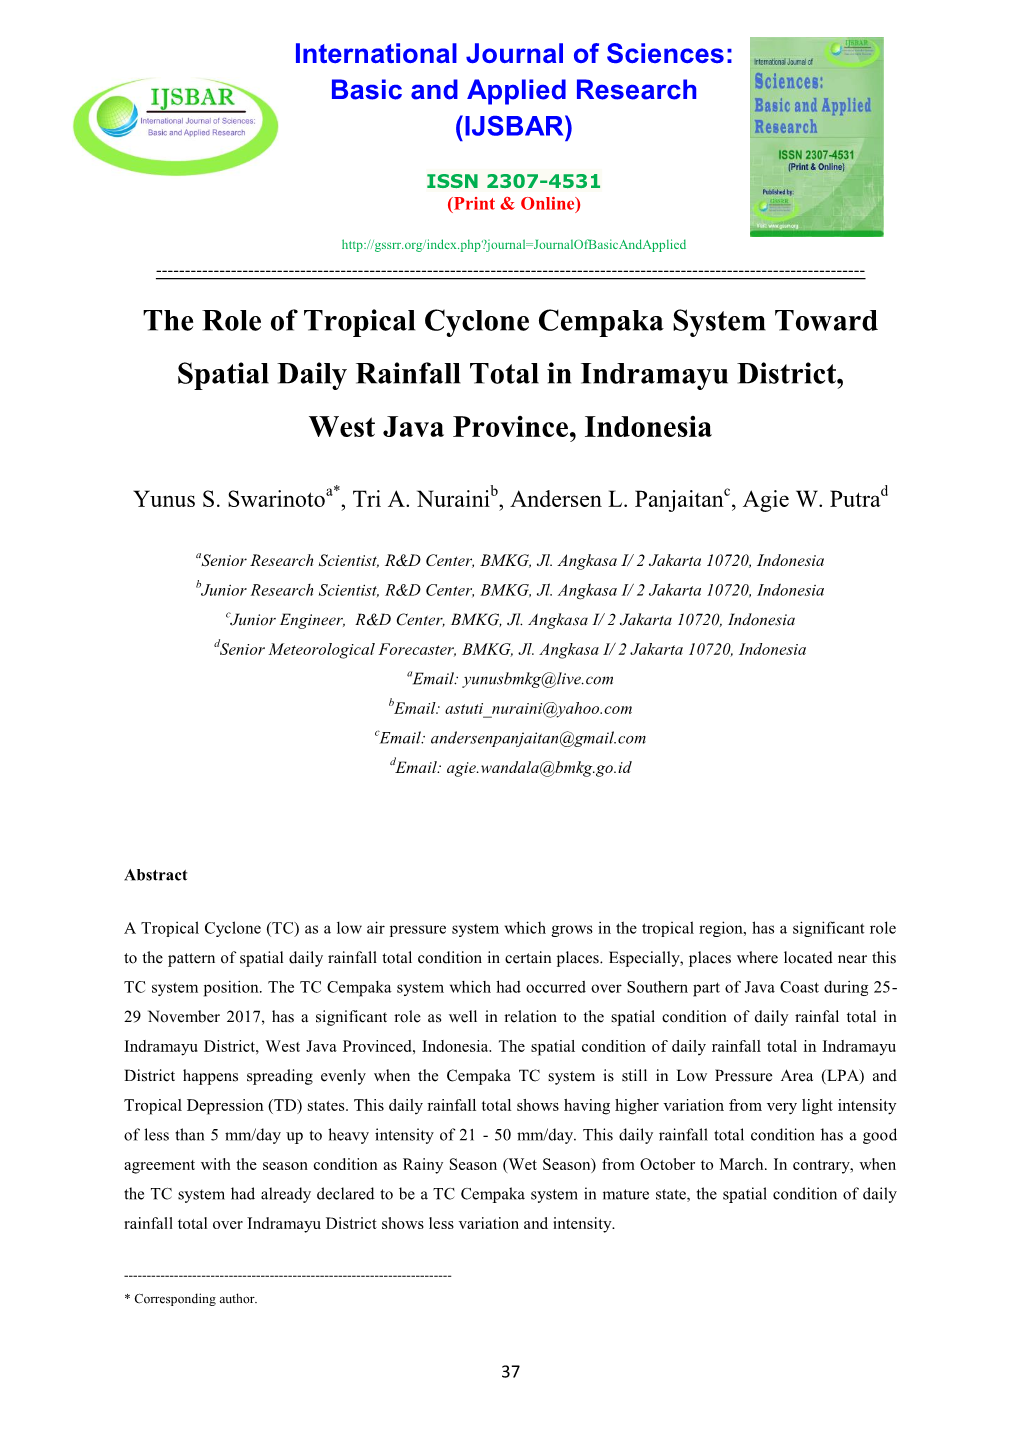 The Role of Tropical Cyclone Cempaka System Toward Spatial Daily Rainfall Total in Indramayu District, West Java Province, Indonesia